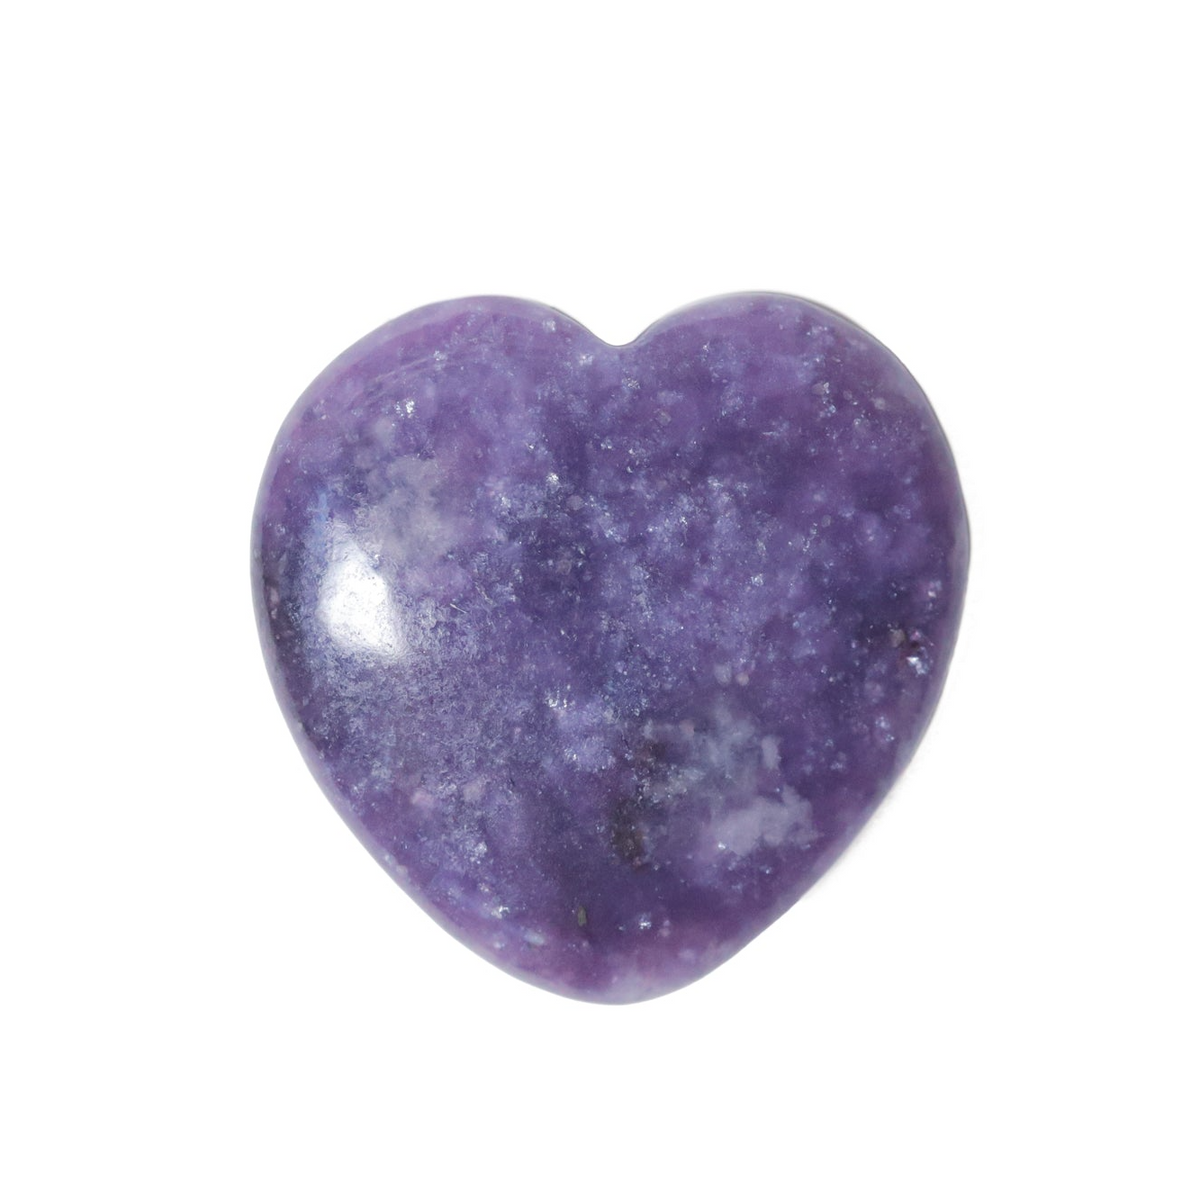 a purple heart shaped object against a white background